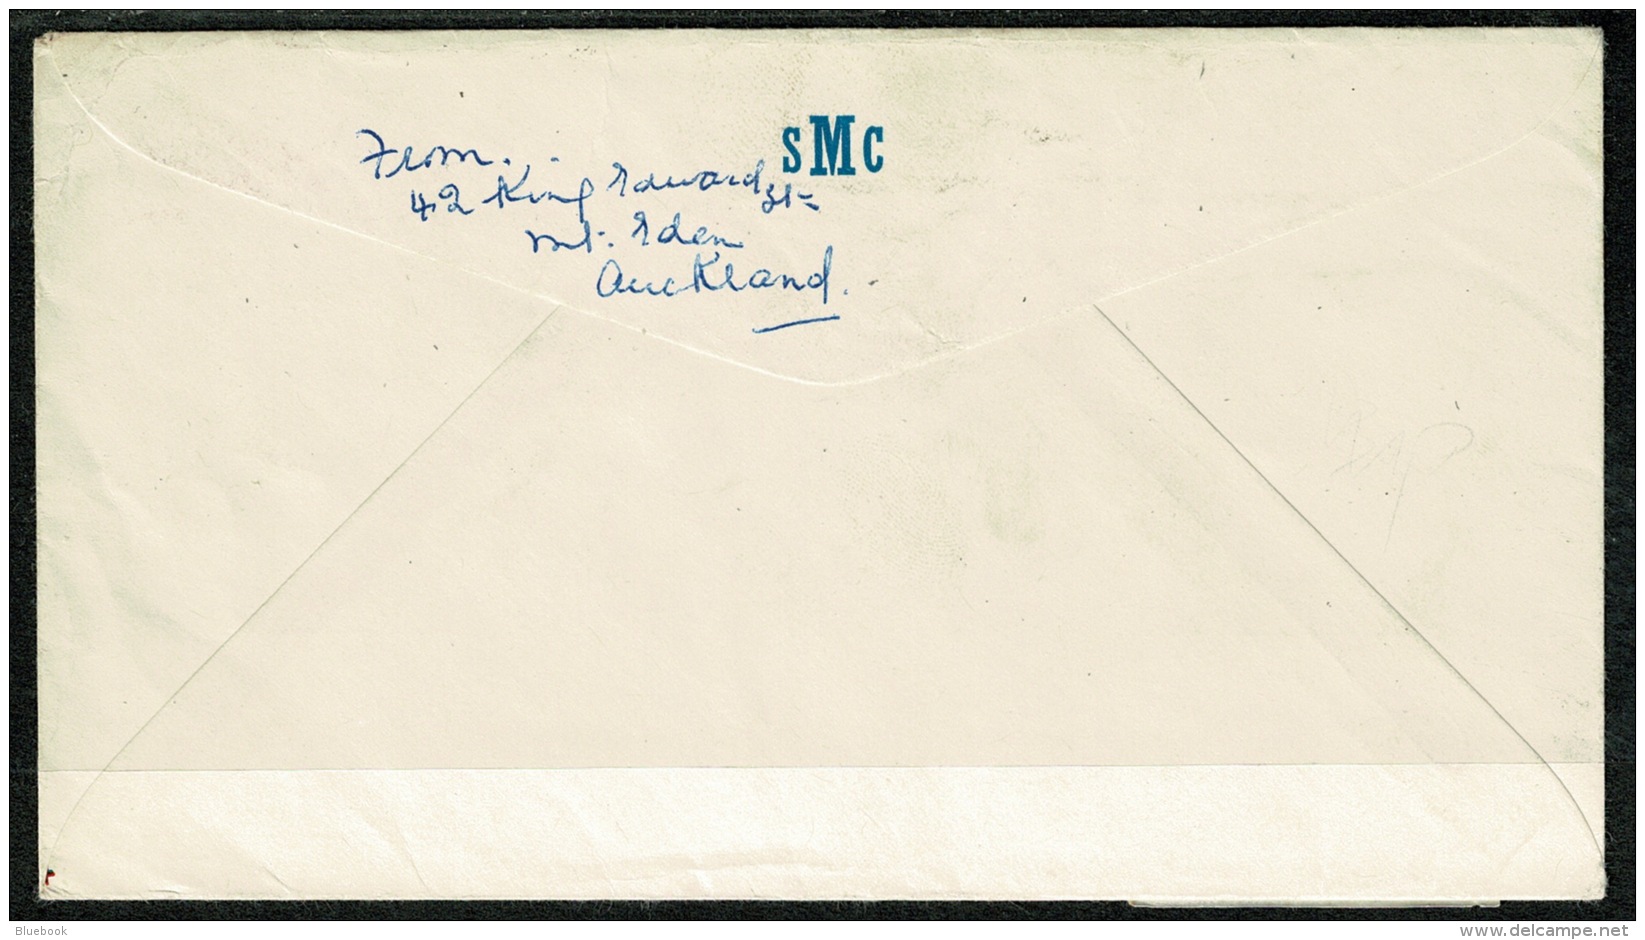 RB 1220 - 1963 Airmail Cover - 8d Rate Dominion Road New Zealand To Picton - Cable Ship C.S. Retriever - Covers & Documents